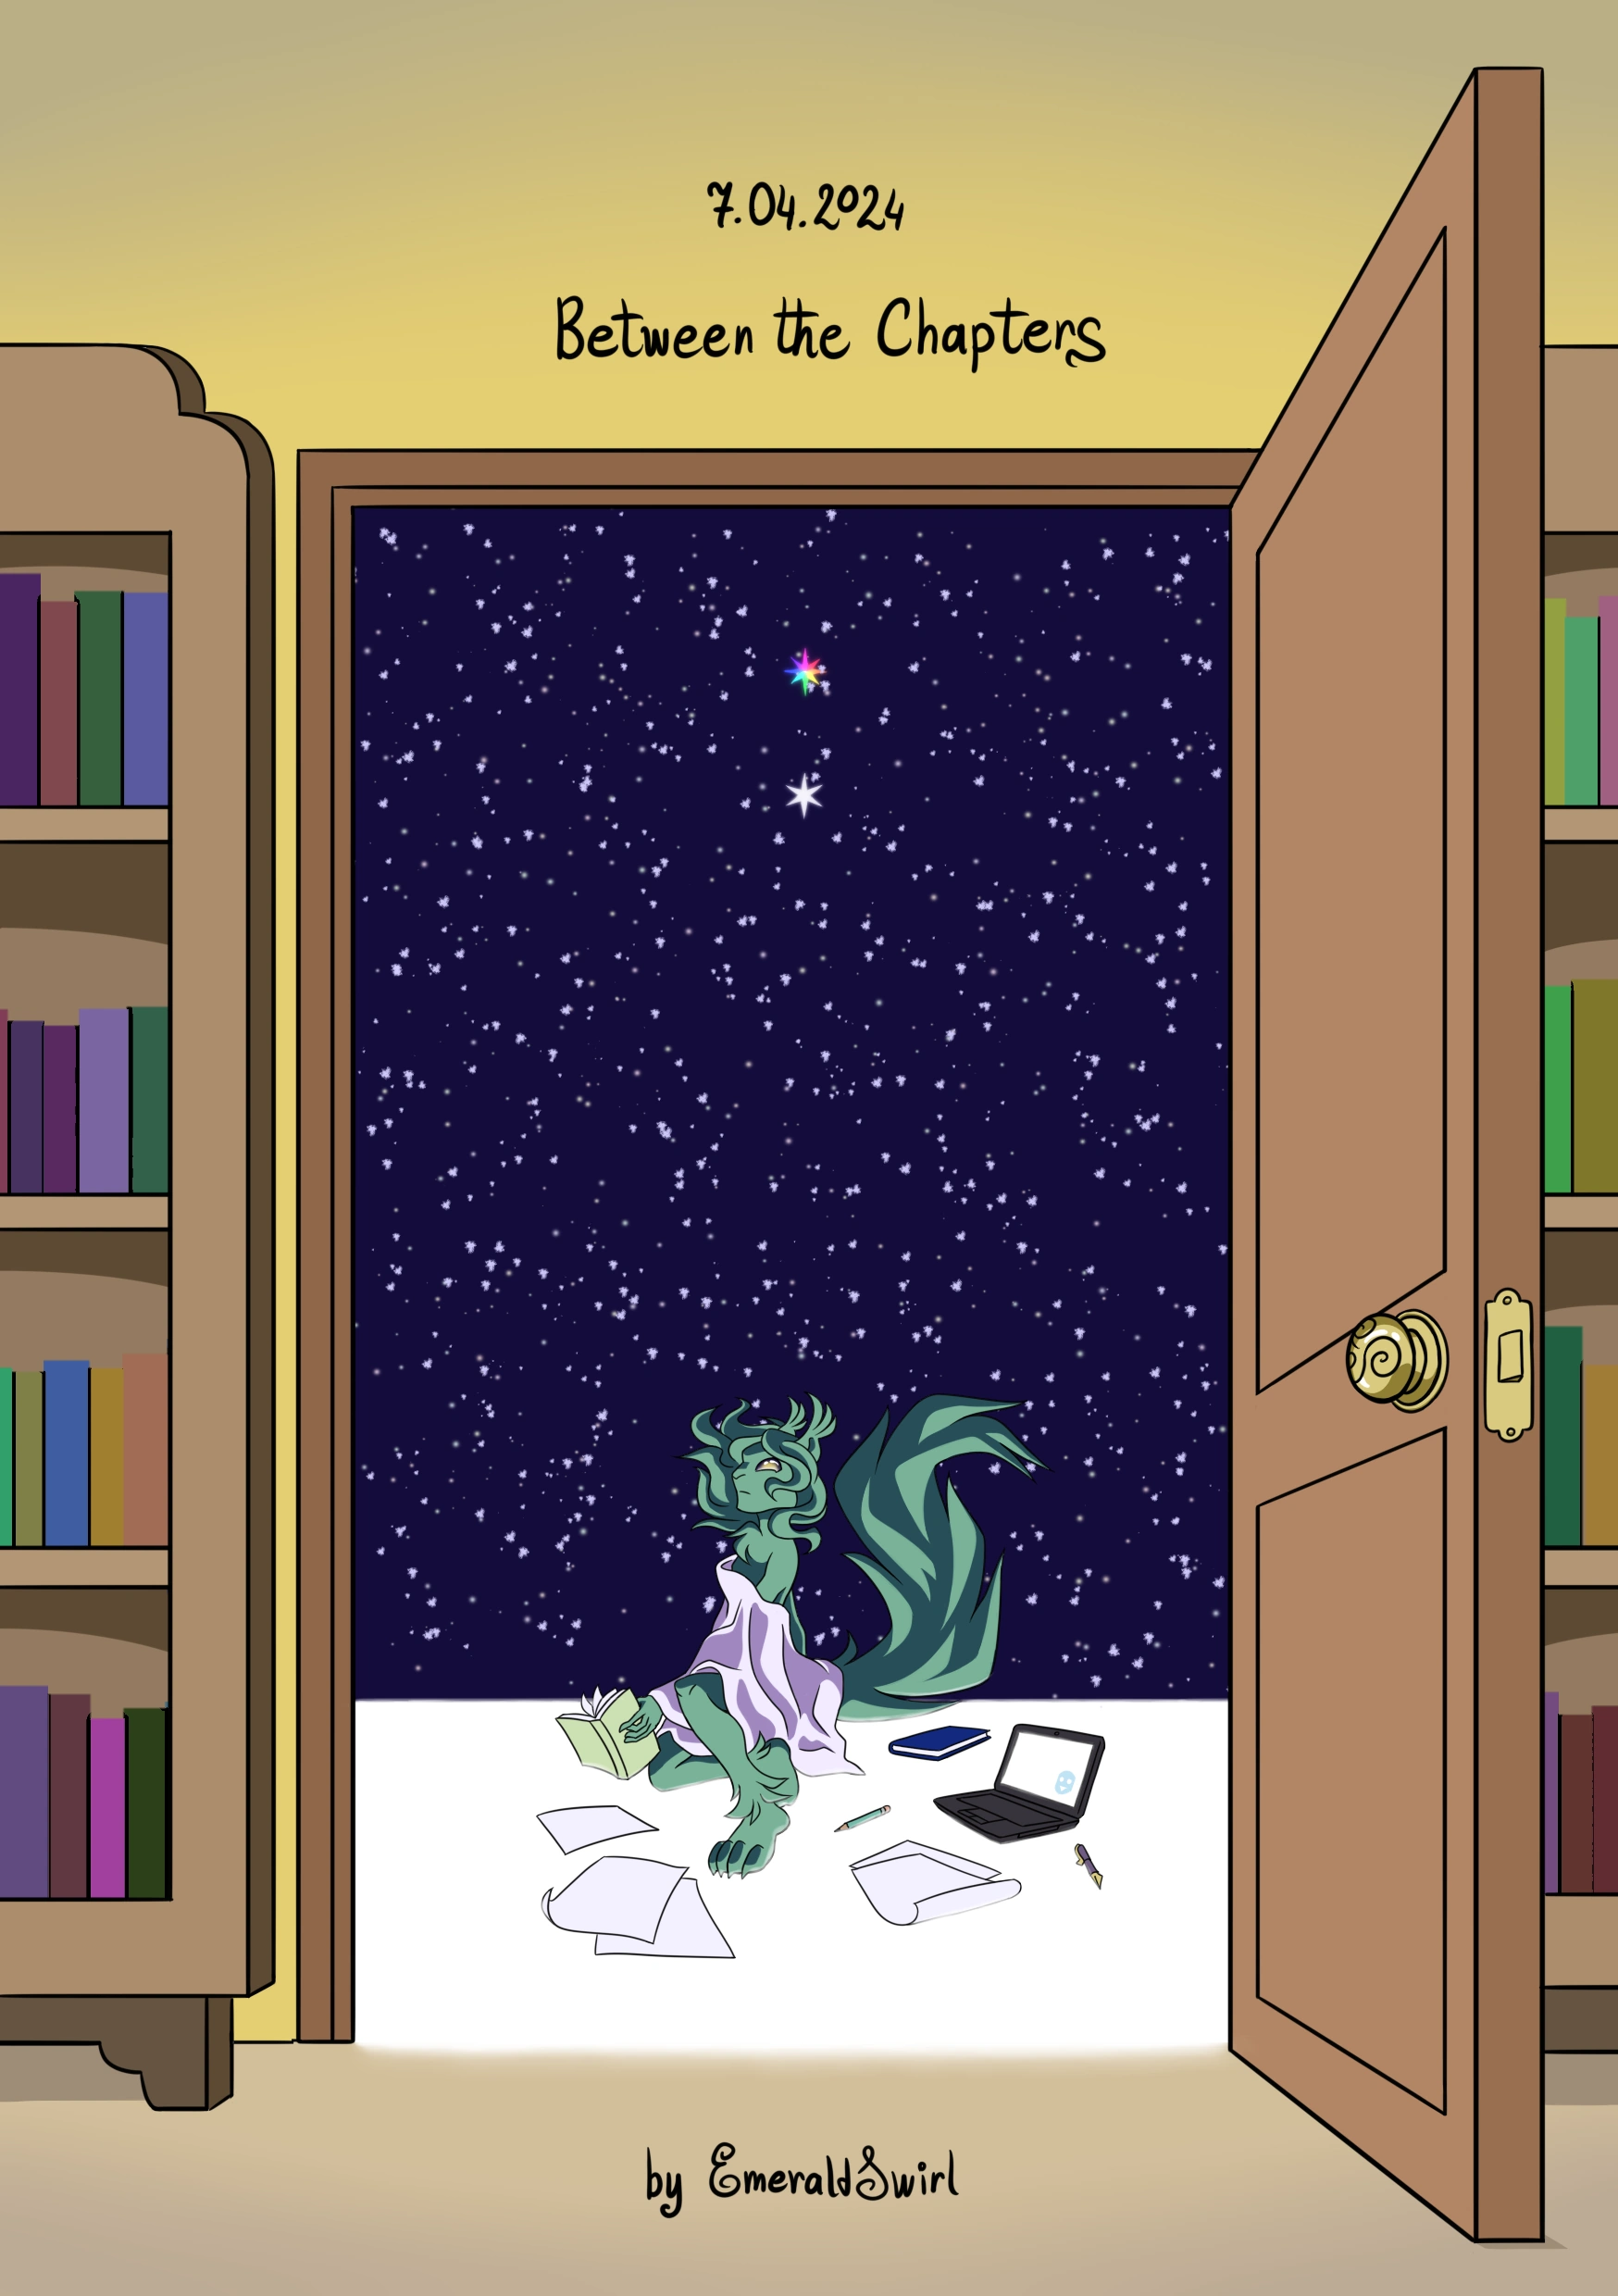 Digital furry art. A door is open between two bookshelves; behind it, there is a glowing white plane against a dark snowy sky. On the plane a green anthropomorphic squirrel sits, draped in a blanket and nothing else, surrounded by sheets of paper, books and a laptop. Two large stars shine prominently in the sky: the lower one light blue, the one further up multicolored. TEXT TRANSCRIPT: 7.04.2024 / Between the Chapters / by EmeraldSwirl